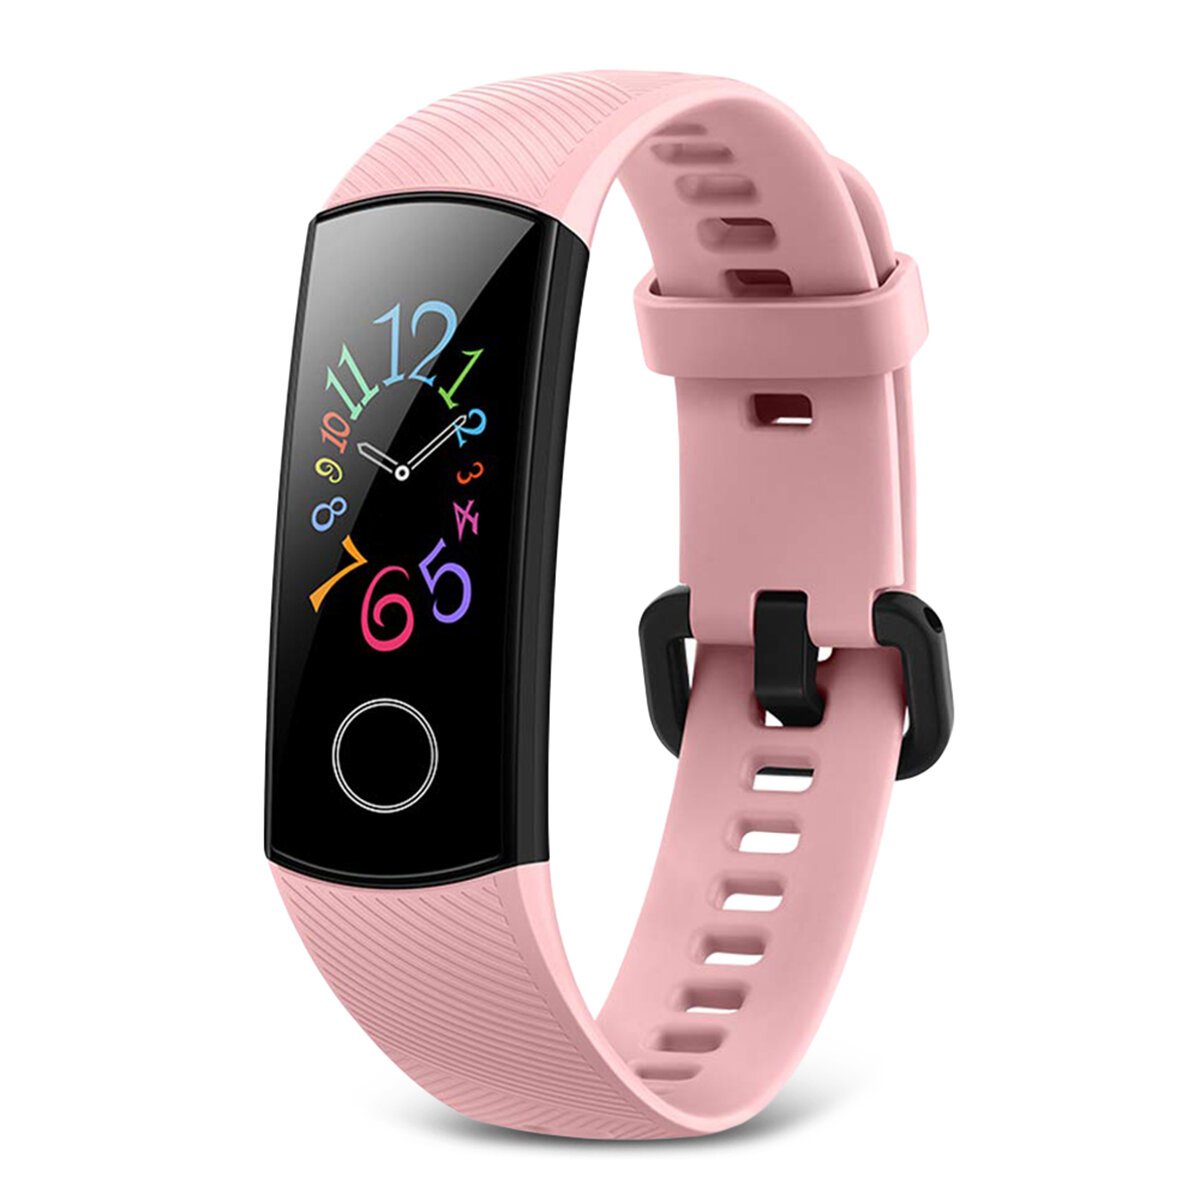 pulse ox spo2 oximeter watch pink band